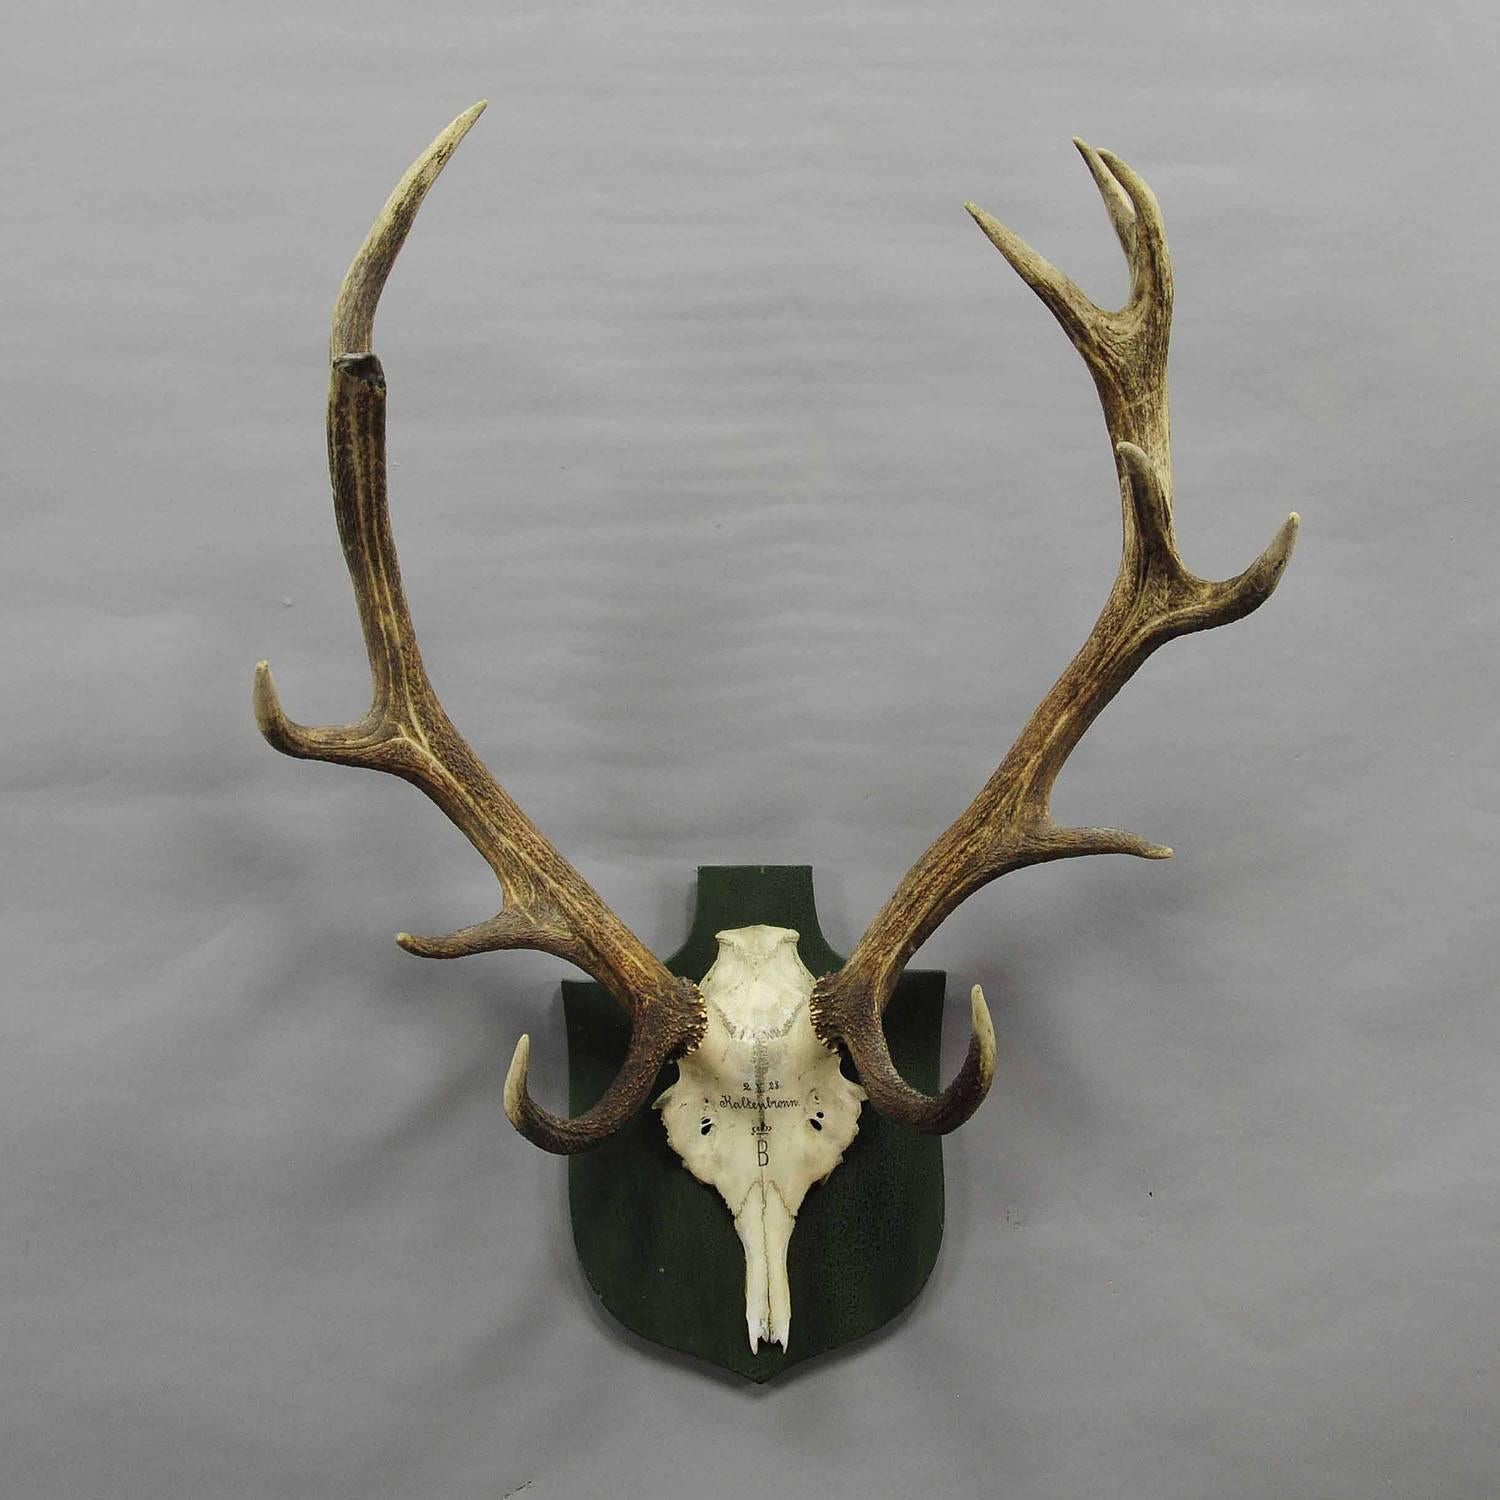 A great odd 14 pointer black forest deer trophy from the palace of Salem in South Germany. Shoot by a member of the lordly family of Baden in 1928. Handwritten inscriptions on the skull with, family crest, place of the hunt and date 1928. Mounted on